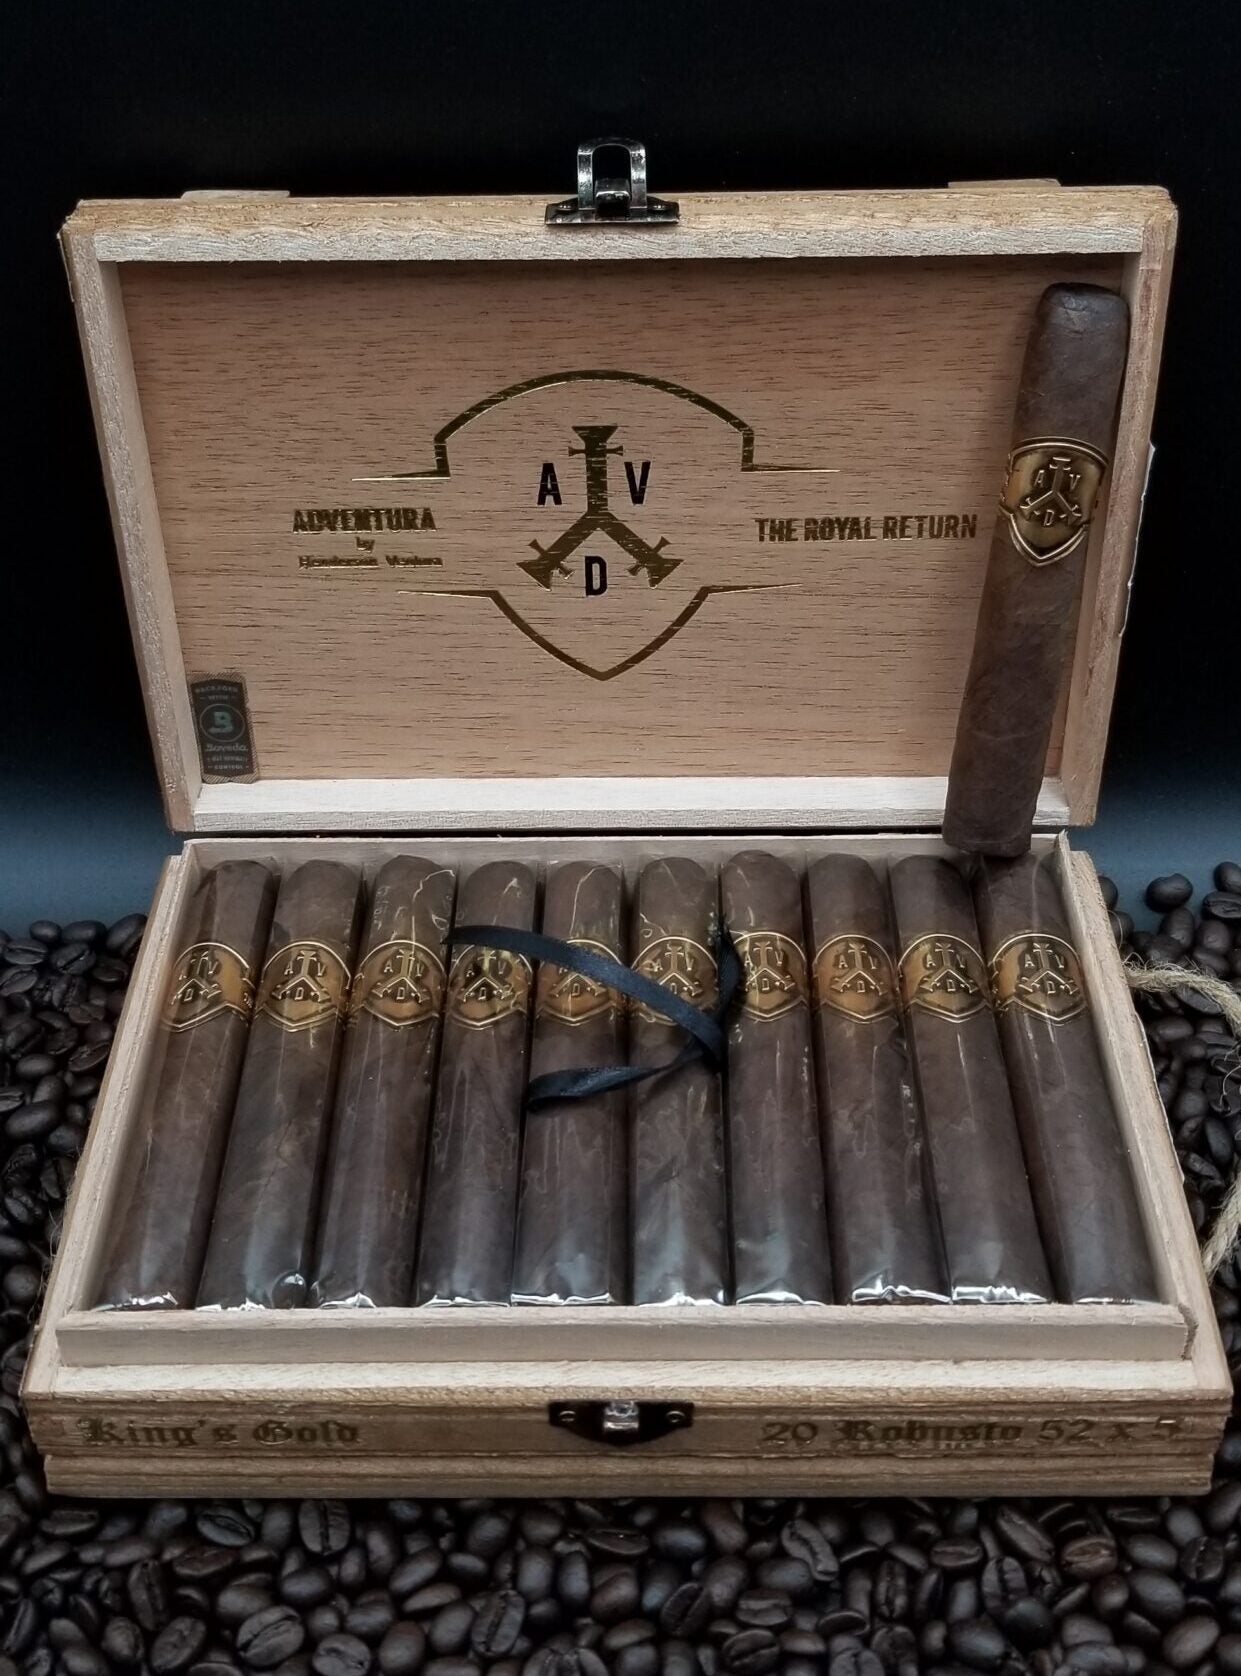 Adventura The Royal Return - King's Gold Robusto cigars supplied by Sir Louis Cigars